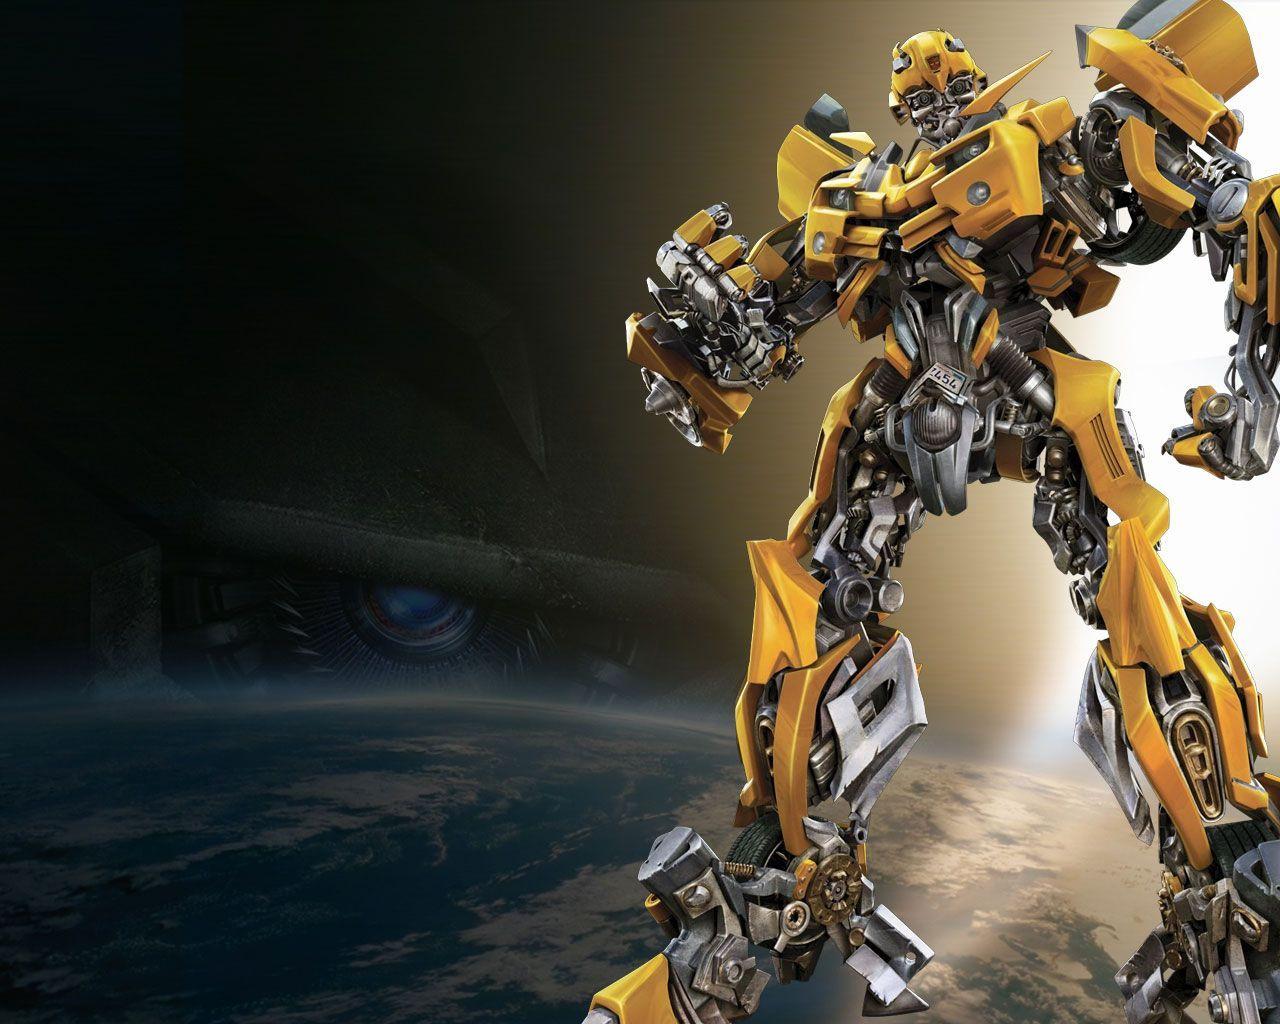 Bumblebee From Transformers Movie wallpaper. It's All a Fantasy